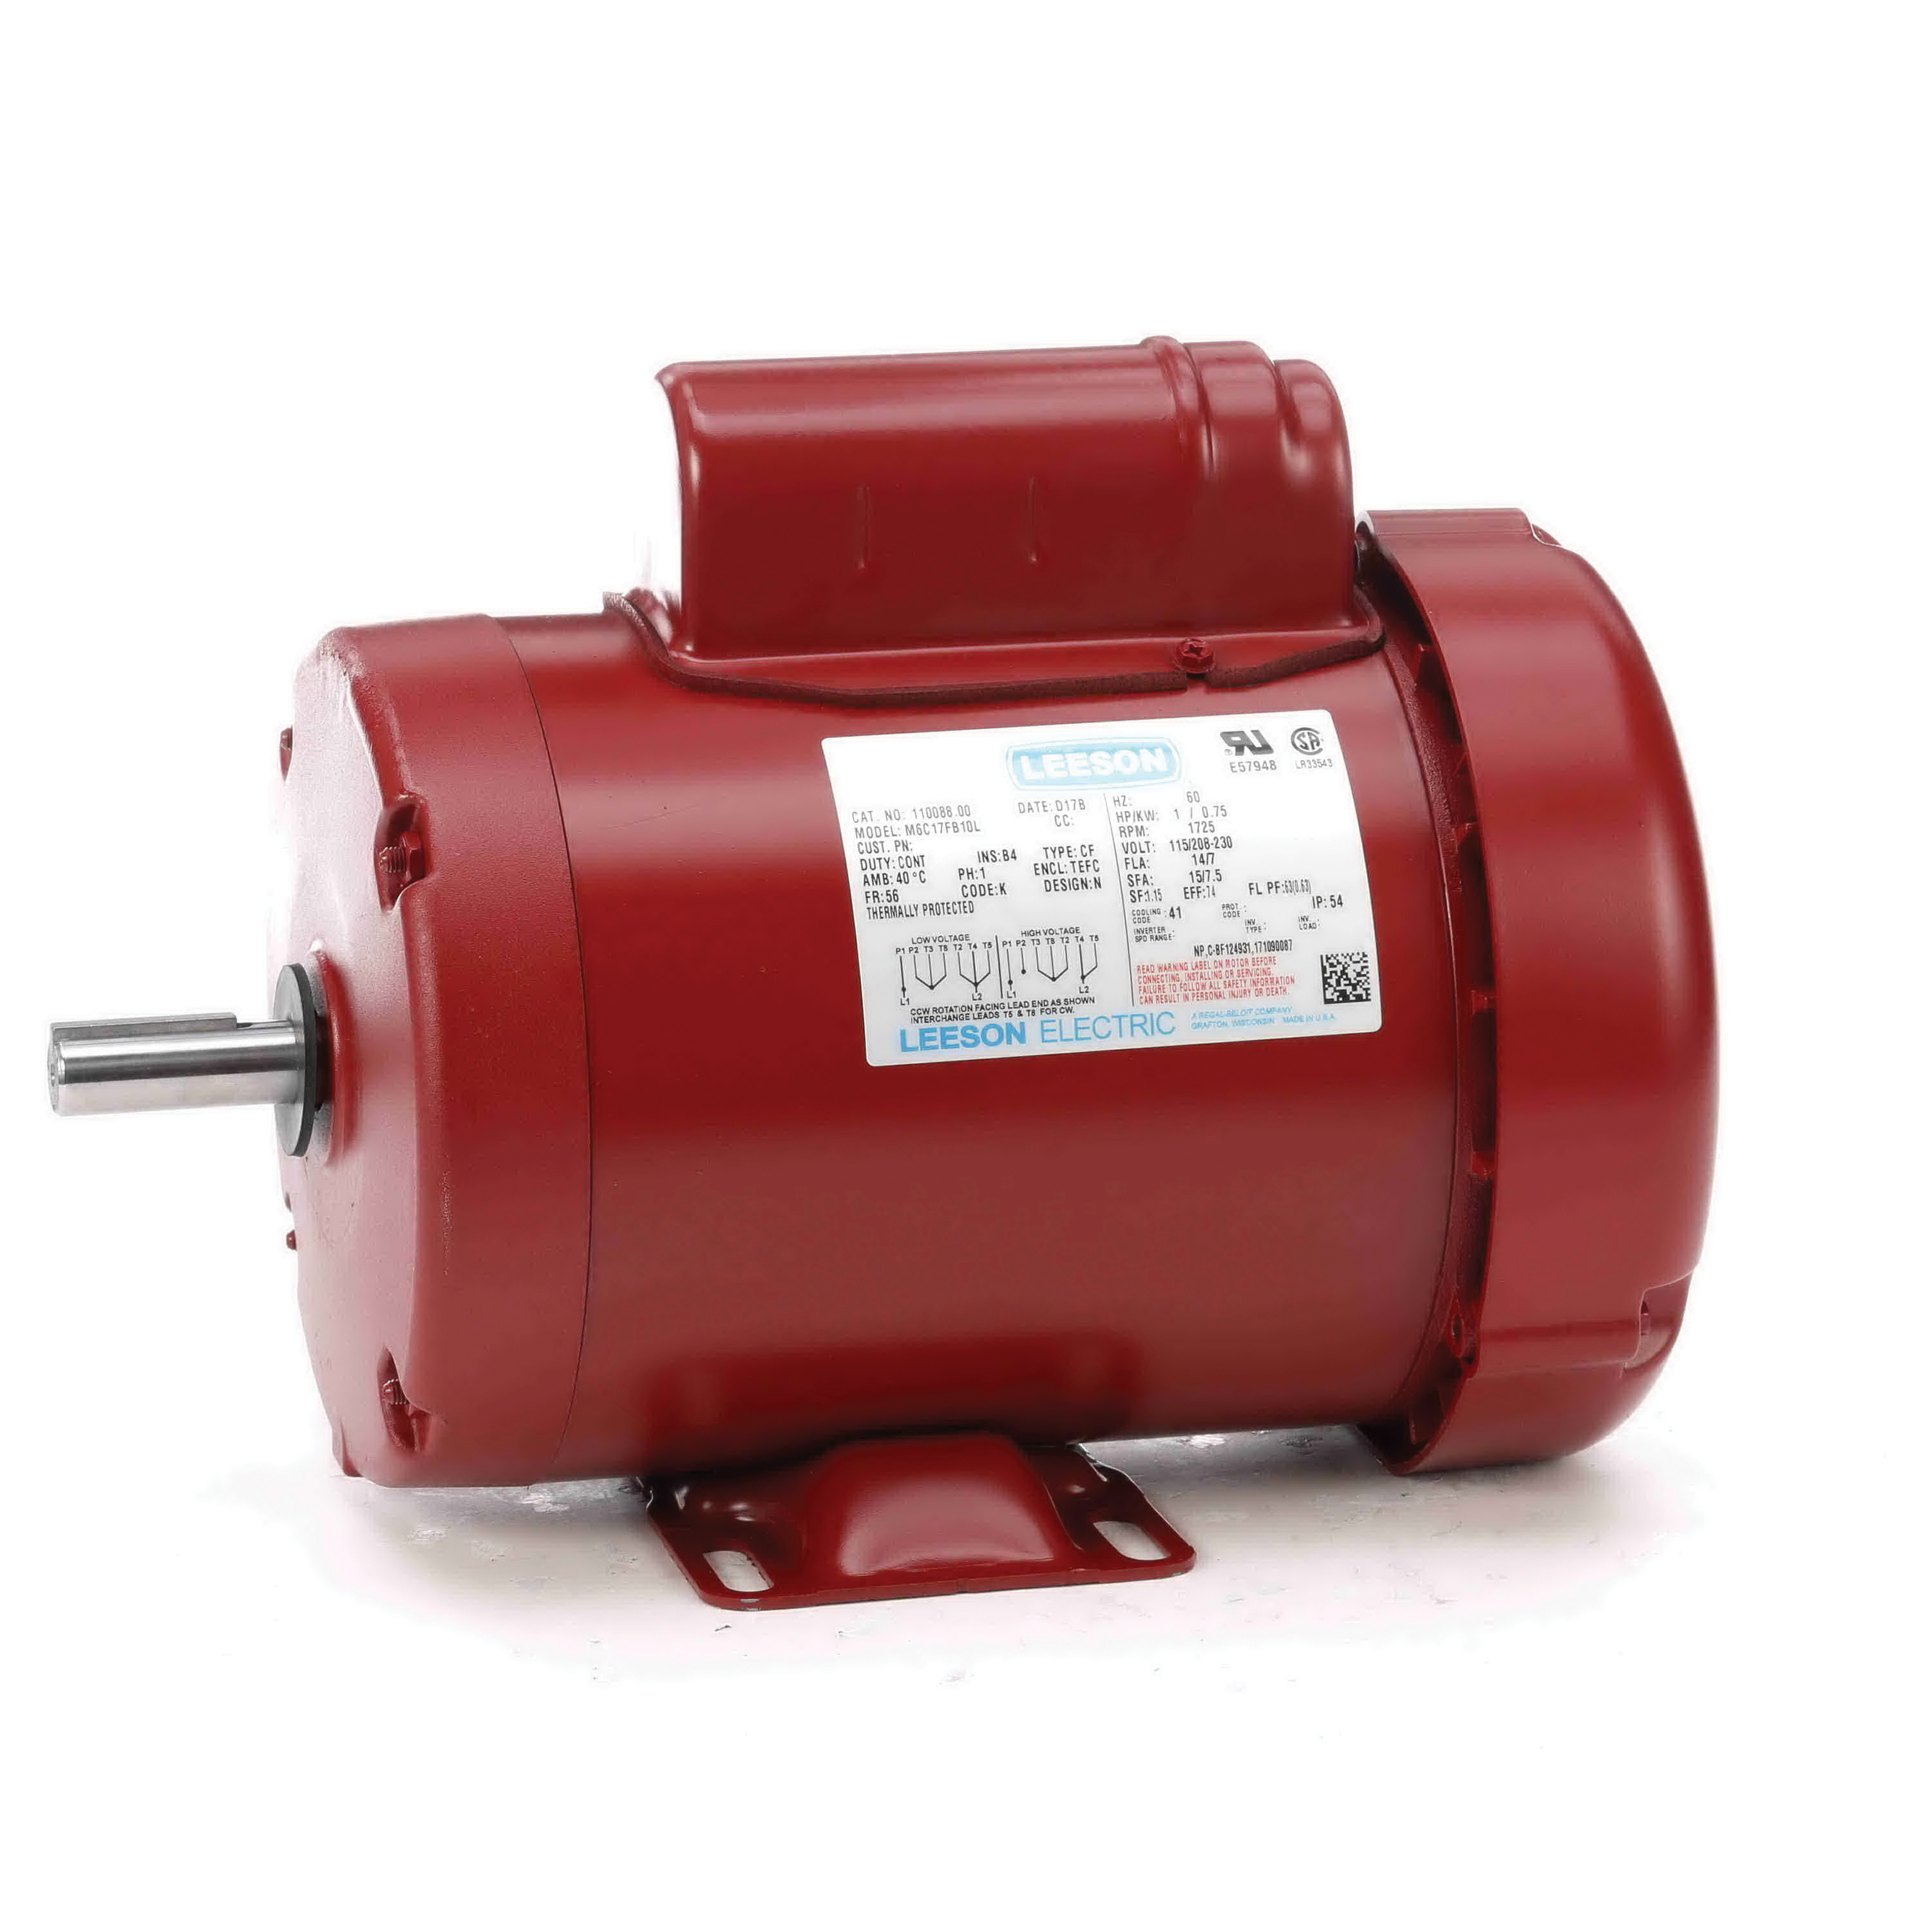 LEESON® 110088.00 Agricultural Motor, 115/208 to 230 V, 14 A, 7 to 7.1 A, 0.75 kW, 1 hp, 1725 rpm Speed, 60 Hz, 56 Frame